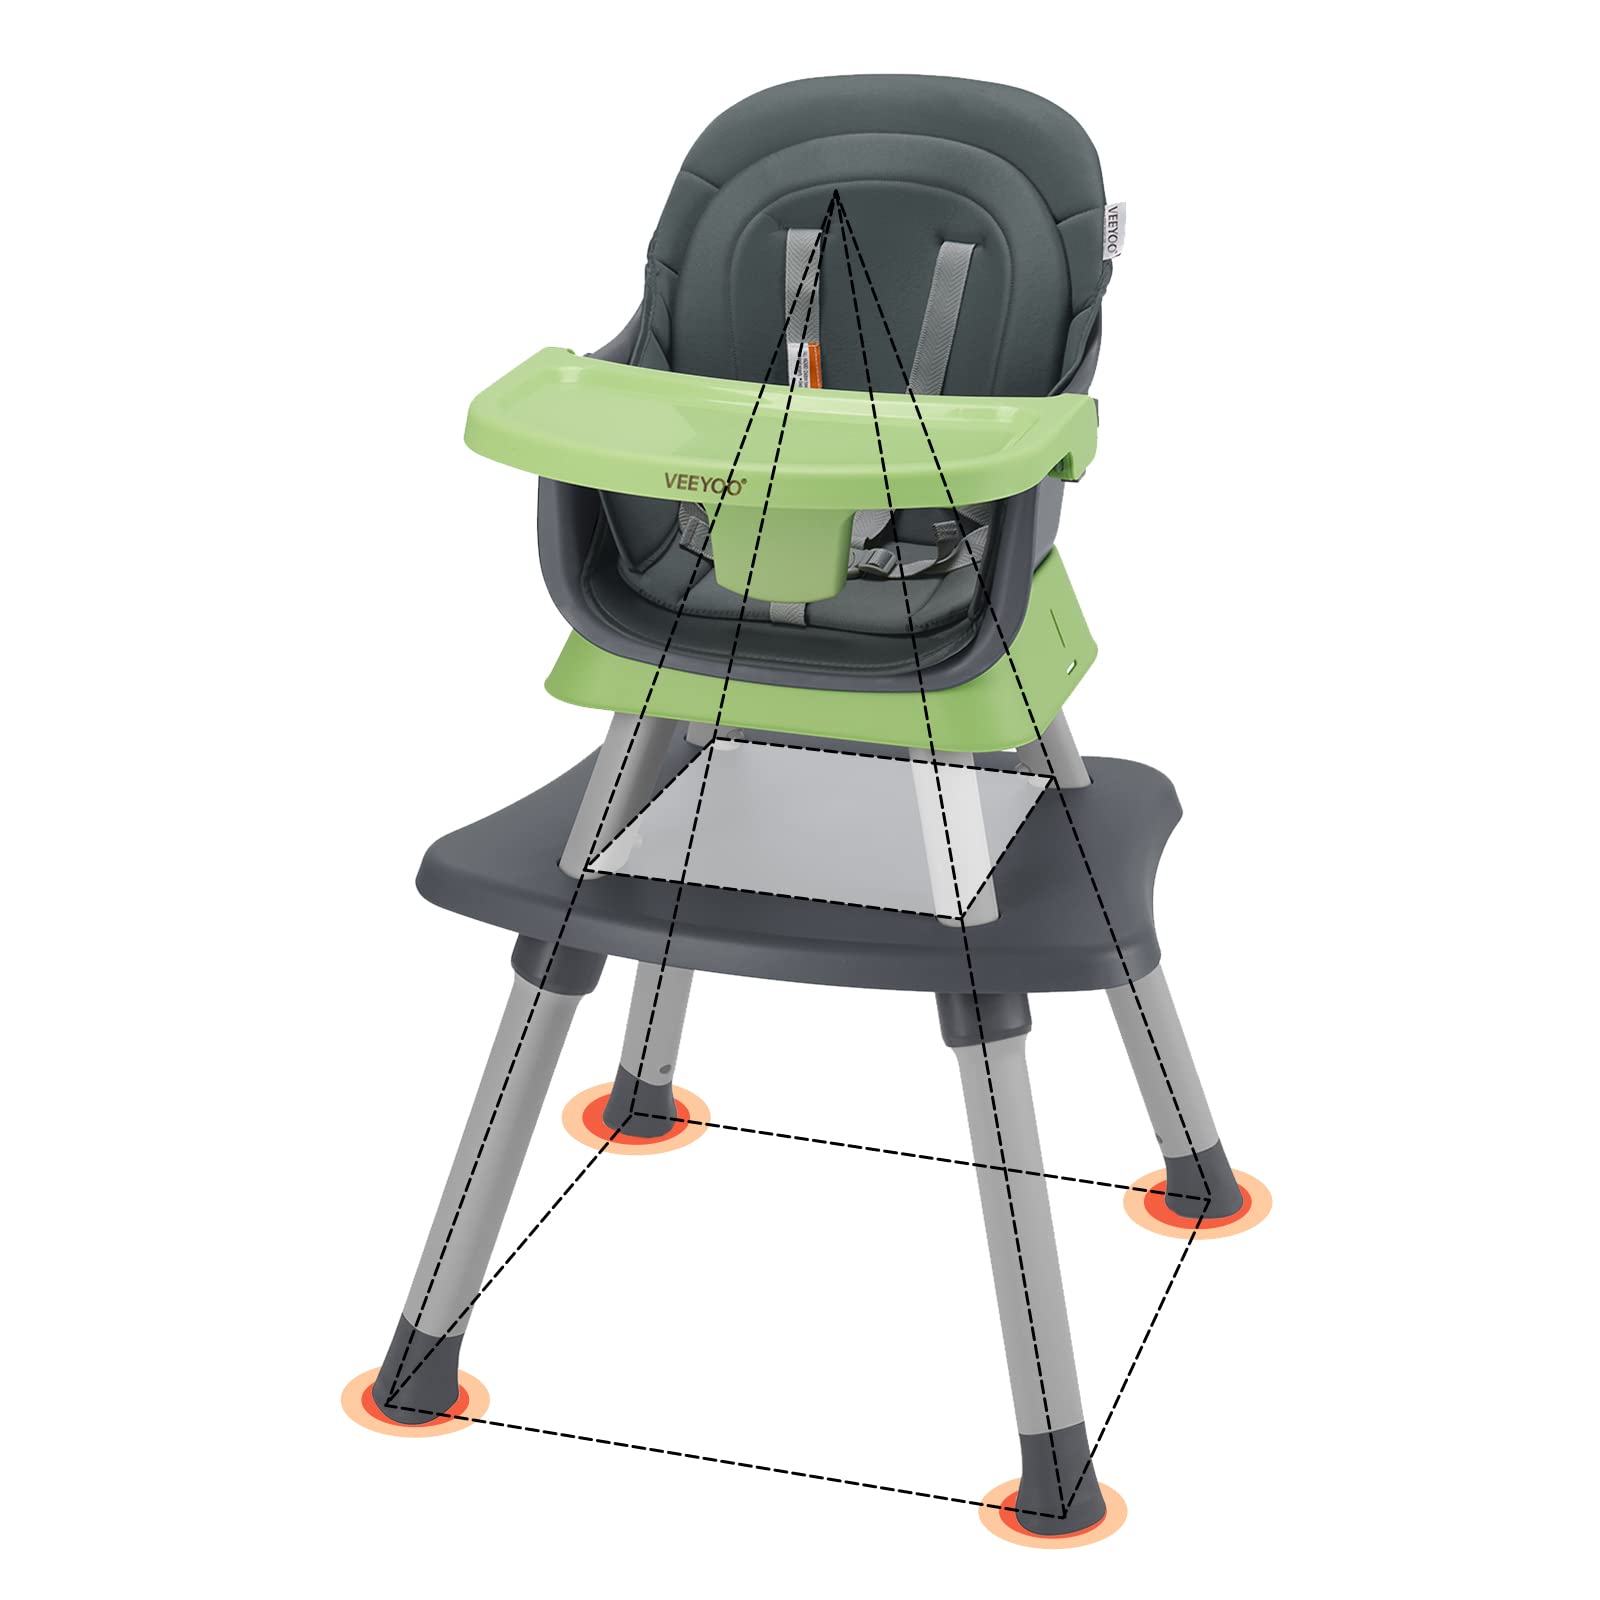 VEEYOO Baby High Chair 6 in 1, Convertible high Chair/Dinning Booster Seat/Toddlers Table & Chair Set with Easy Clearance, Removable Tray, Adjustable Legs, Safety Harness for Girl/boy